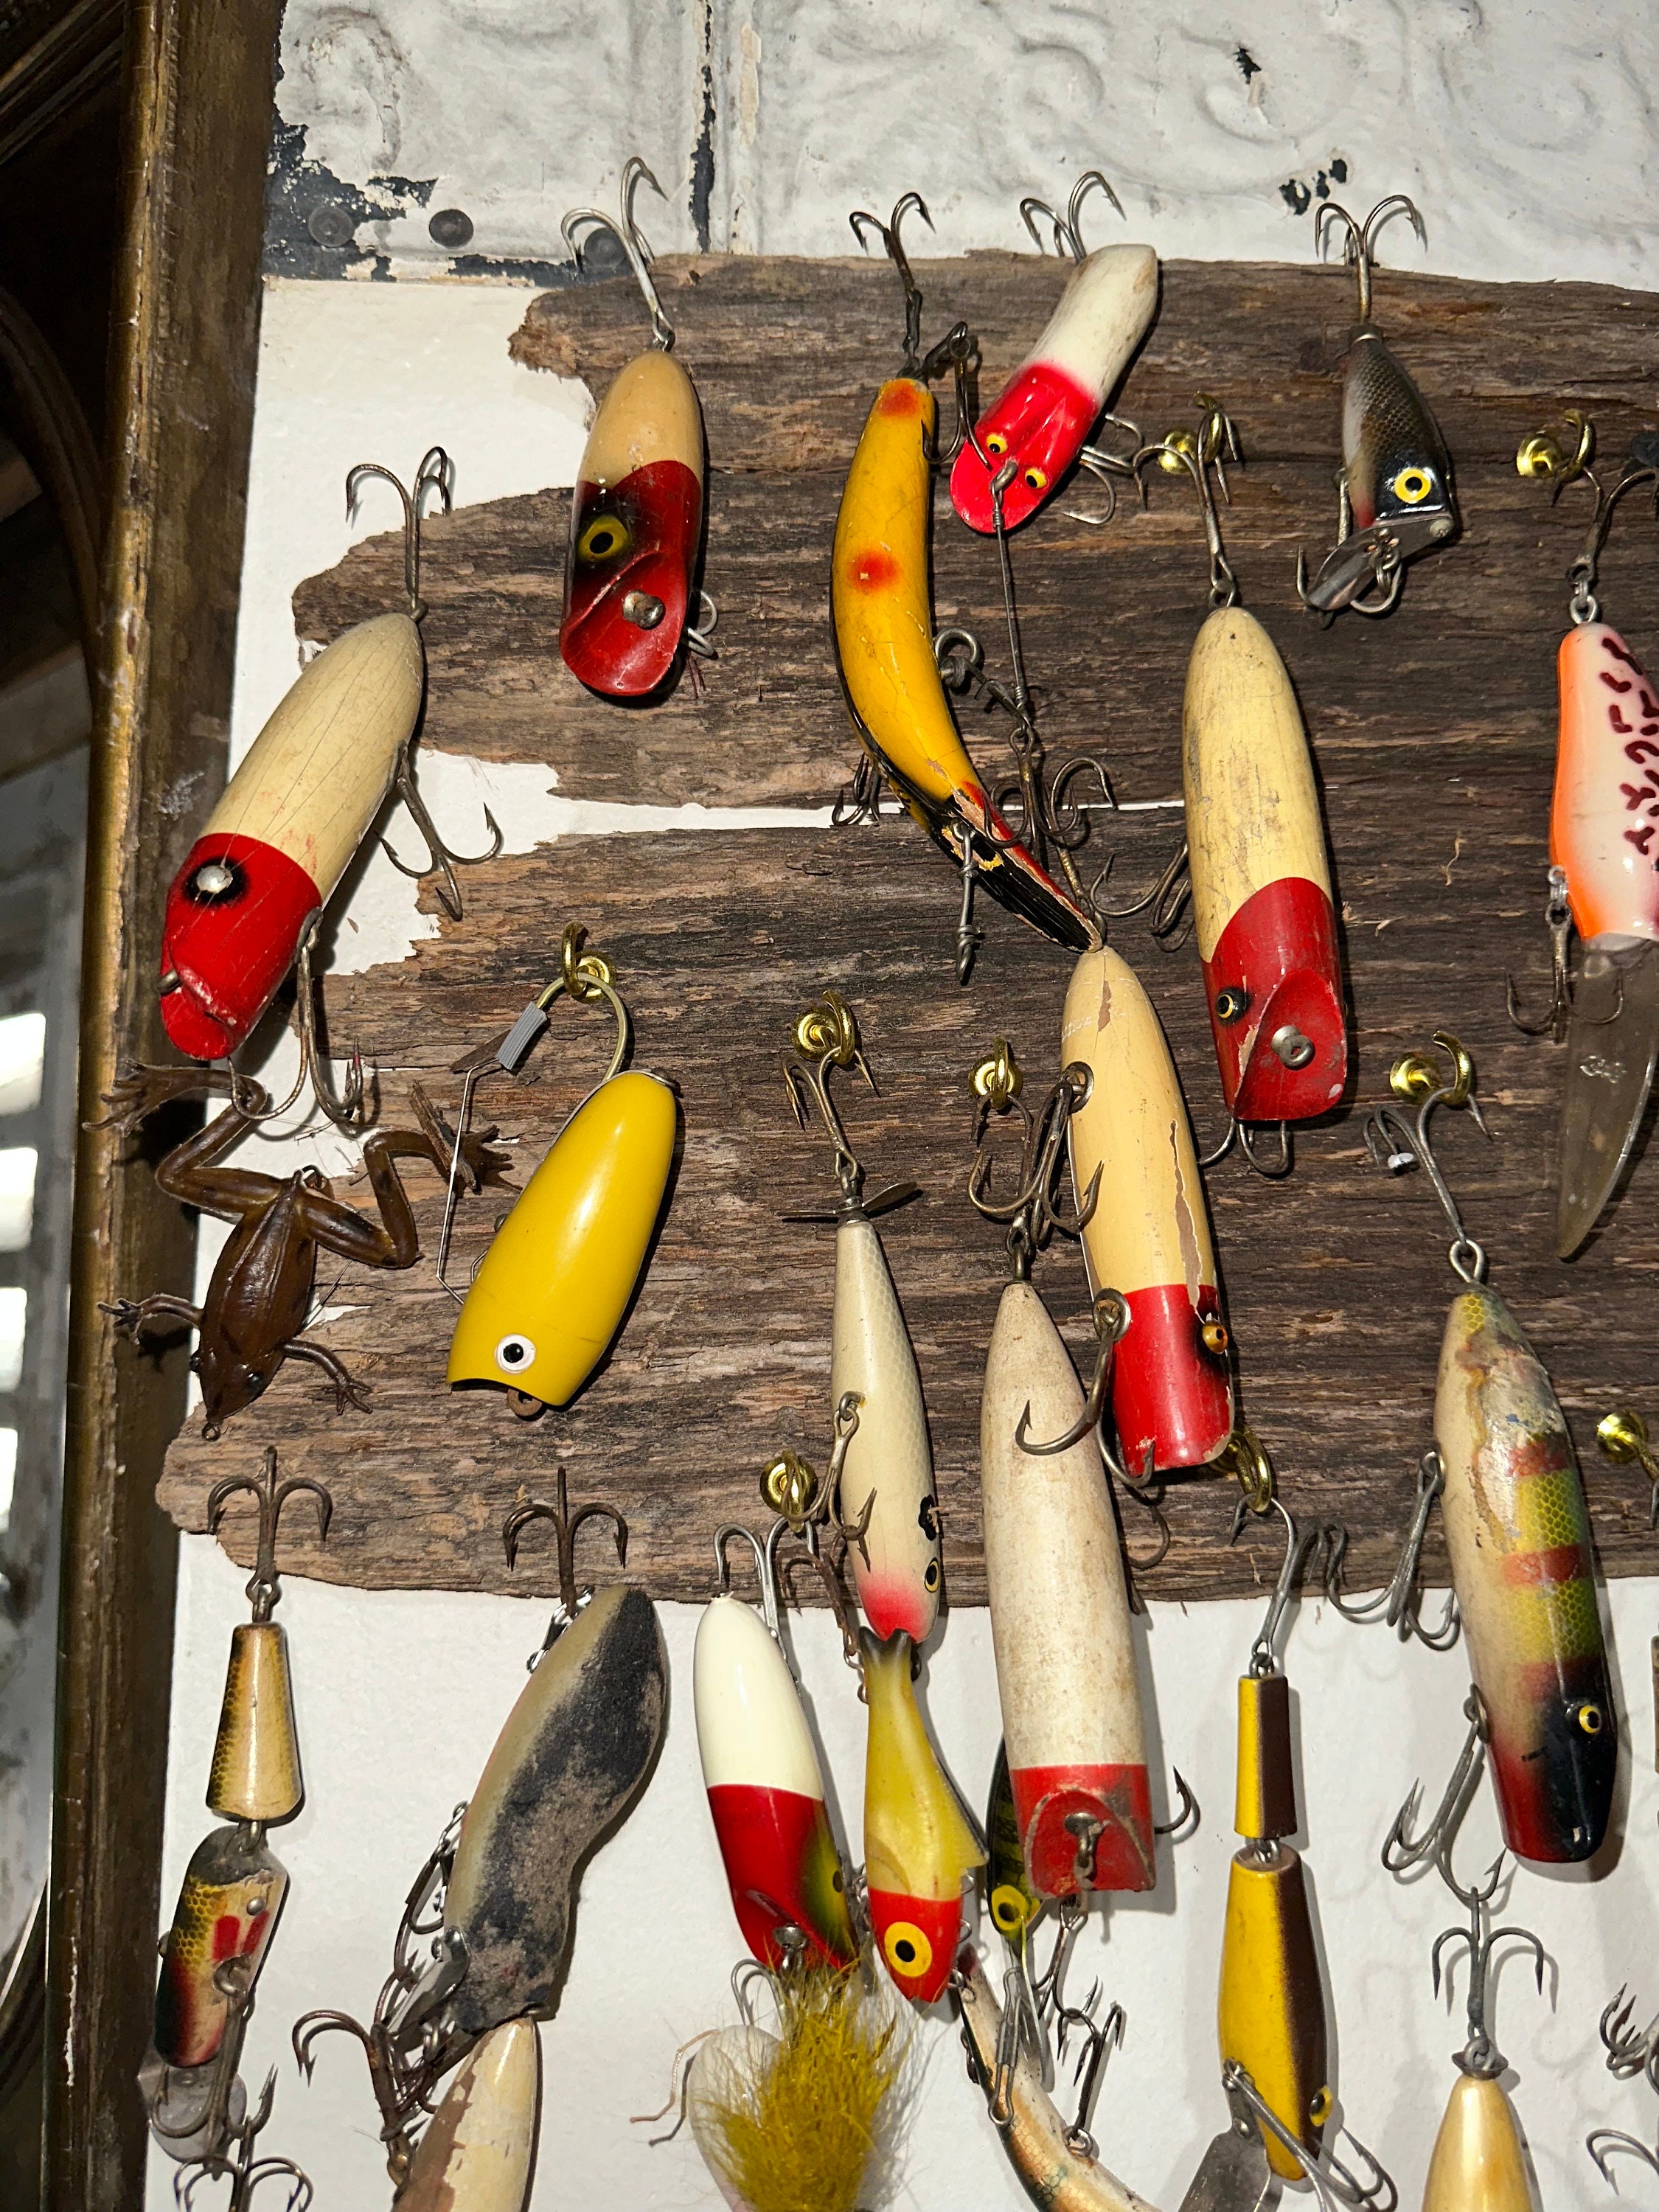 Buy Antique/vintage Fishing Lure, Tackle, Gear, Freshwater